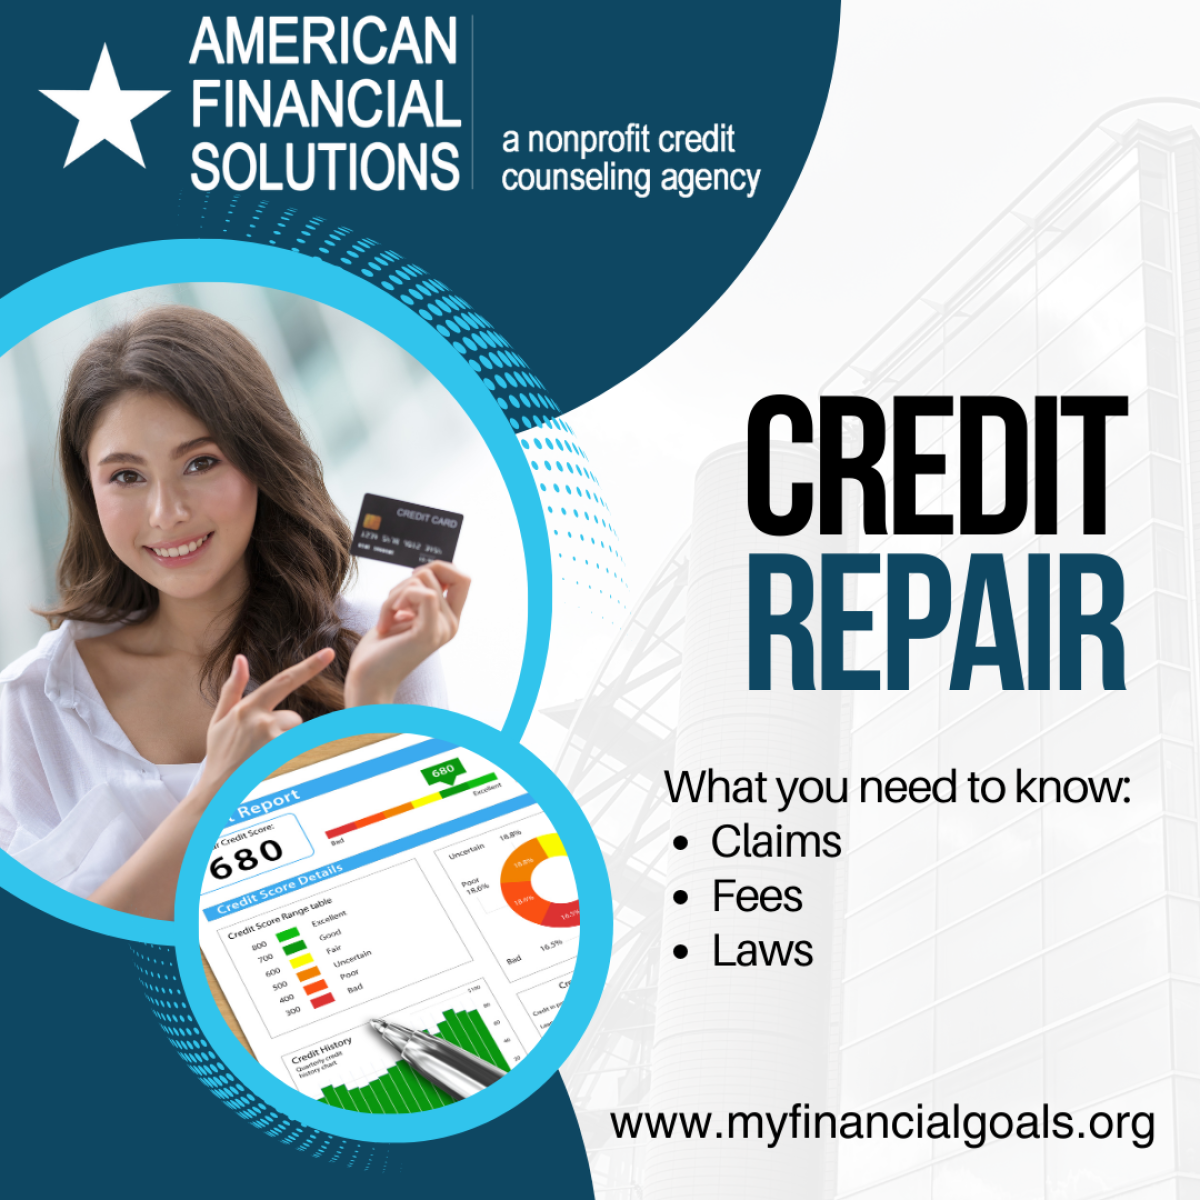 Credit Repair What you need to know. Image